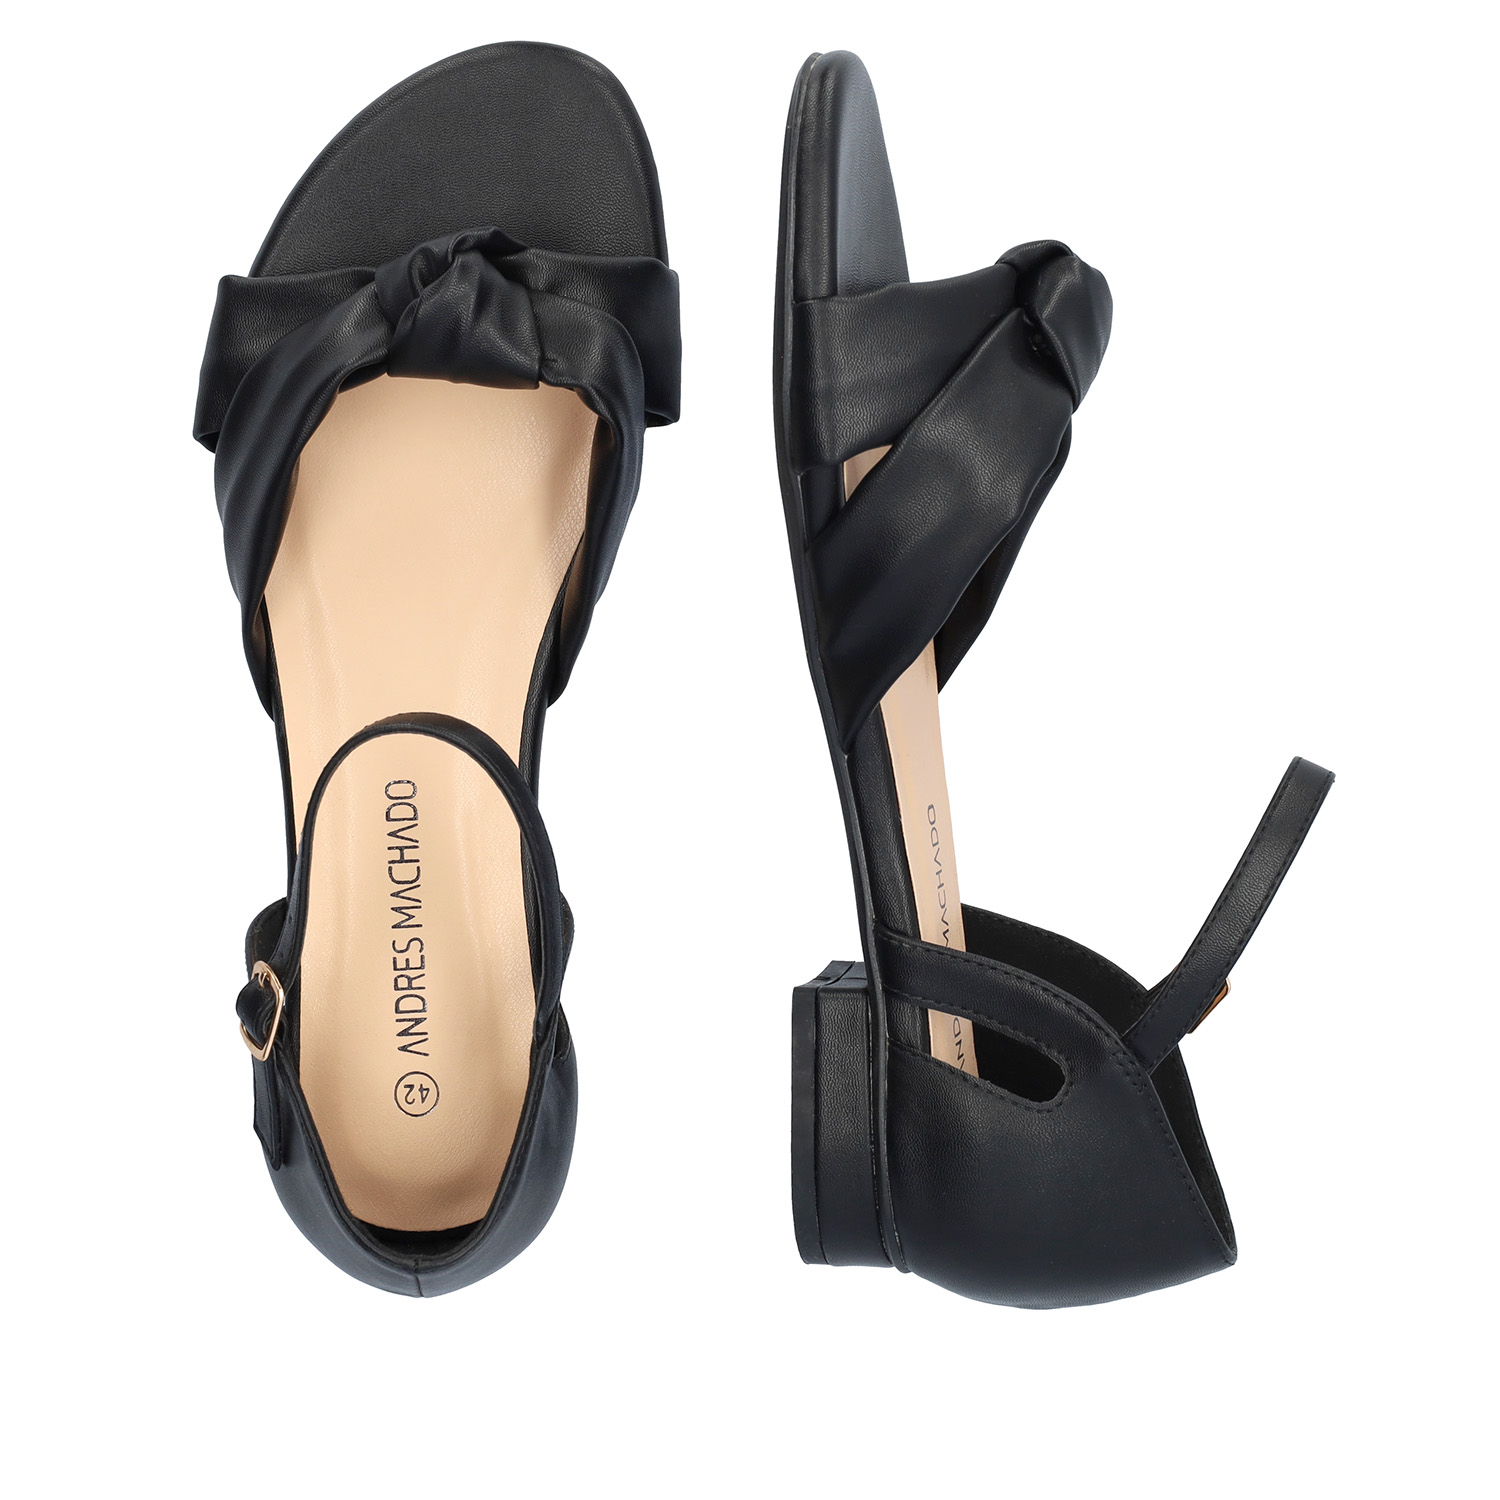 Flat sandals in soft black colored material 